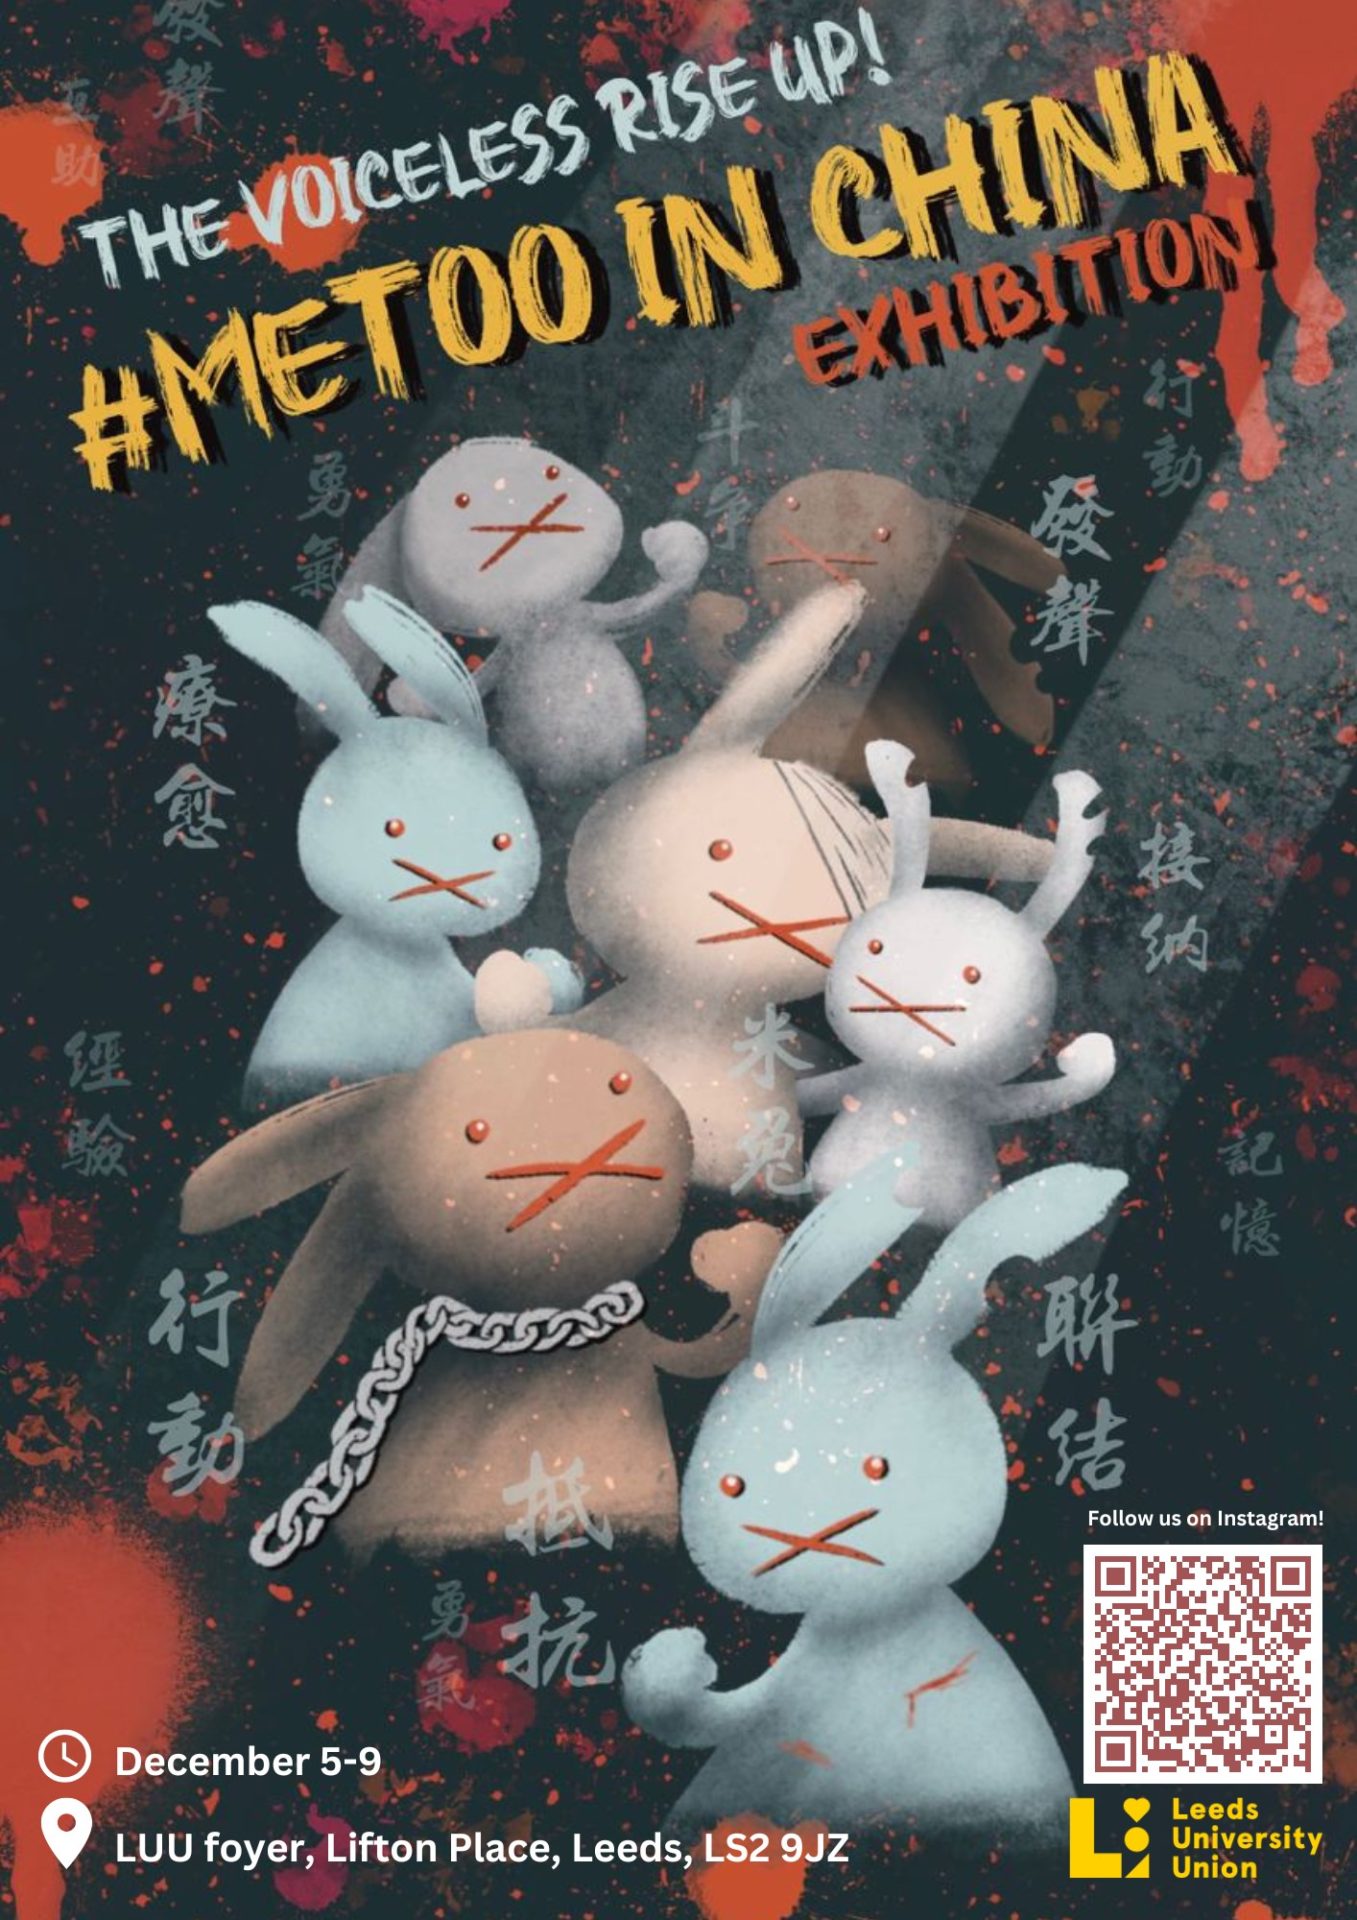 #MeToo in China Exhibition at the University of Leeds (5-9 December)